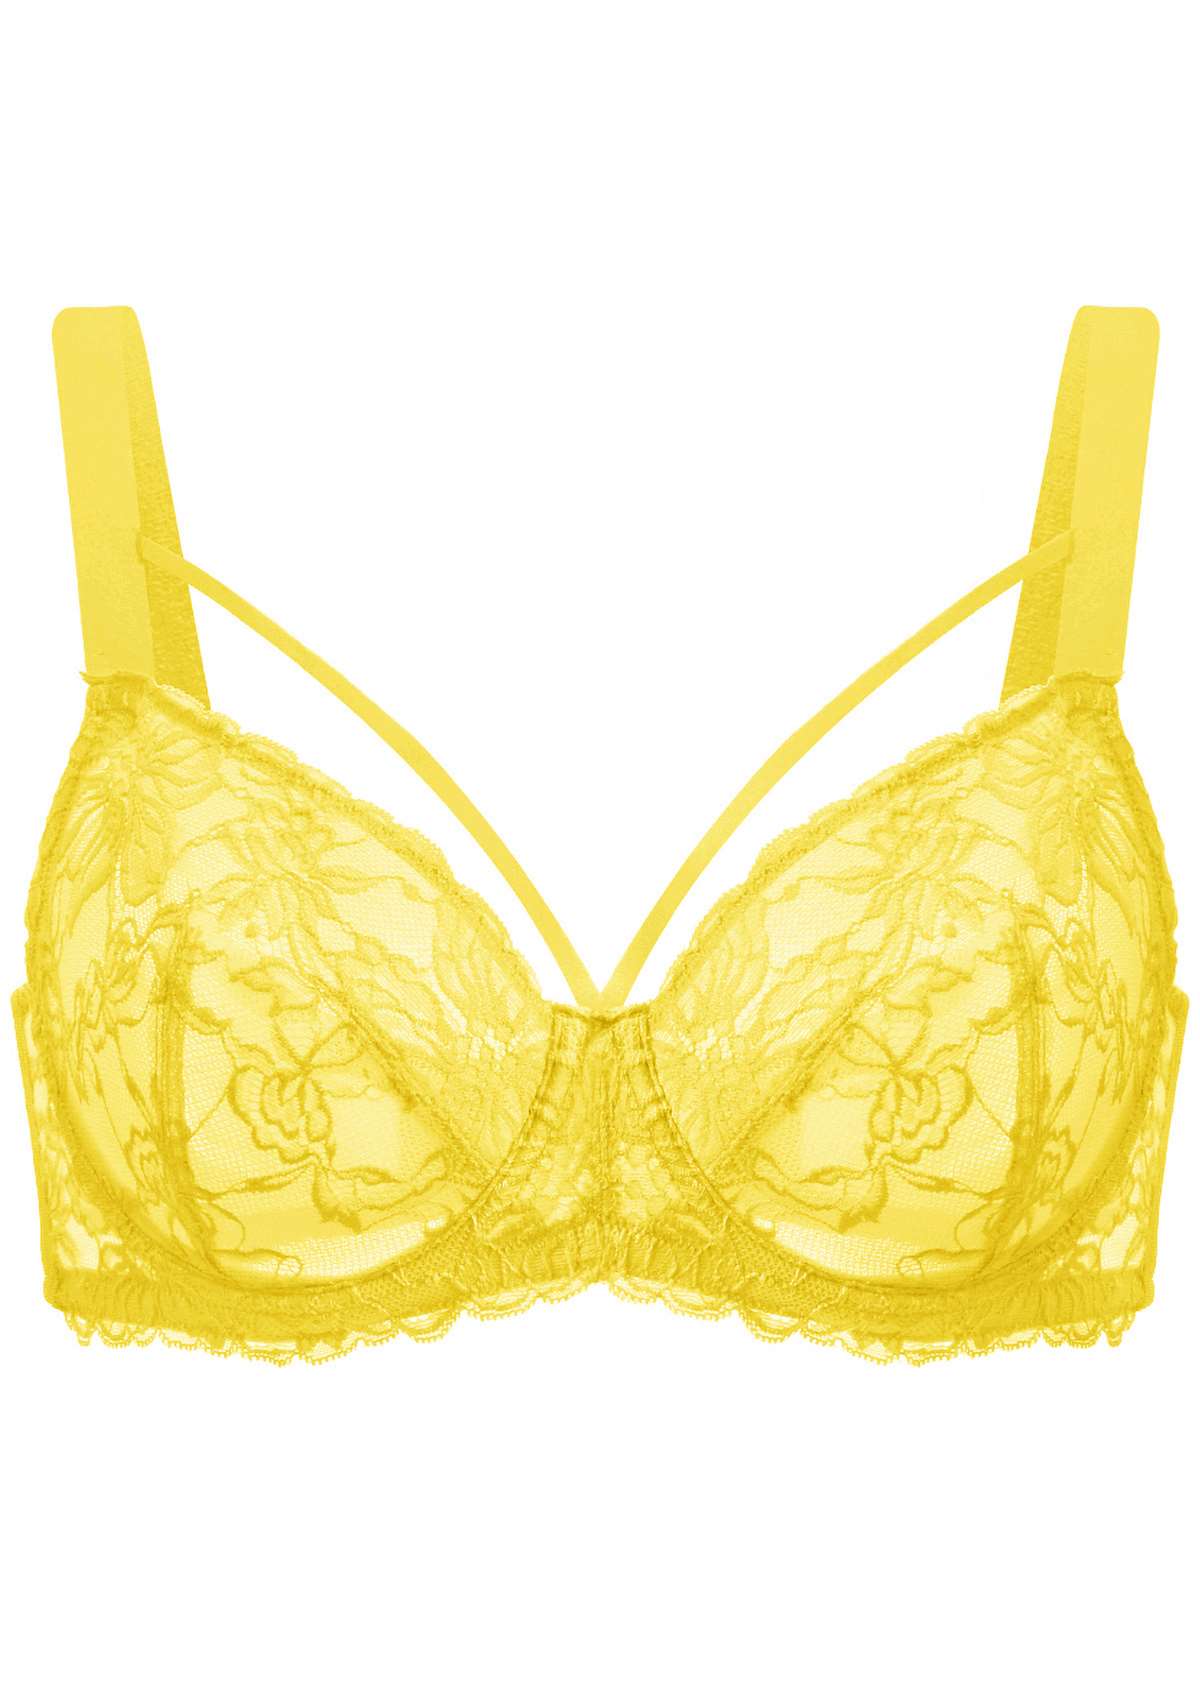 HSIA Unlined Lace Mesh Minimizer Bra For Large Breasts, Full Coverage - Bright Yellow / 36 / I